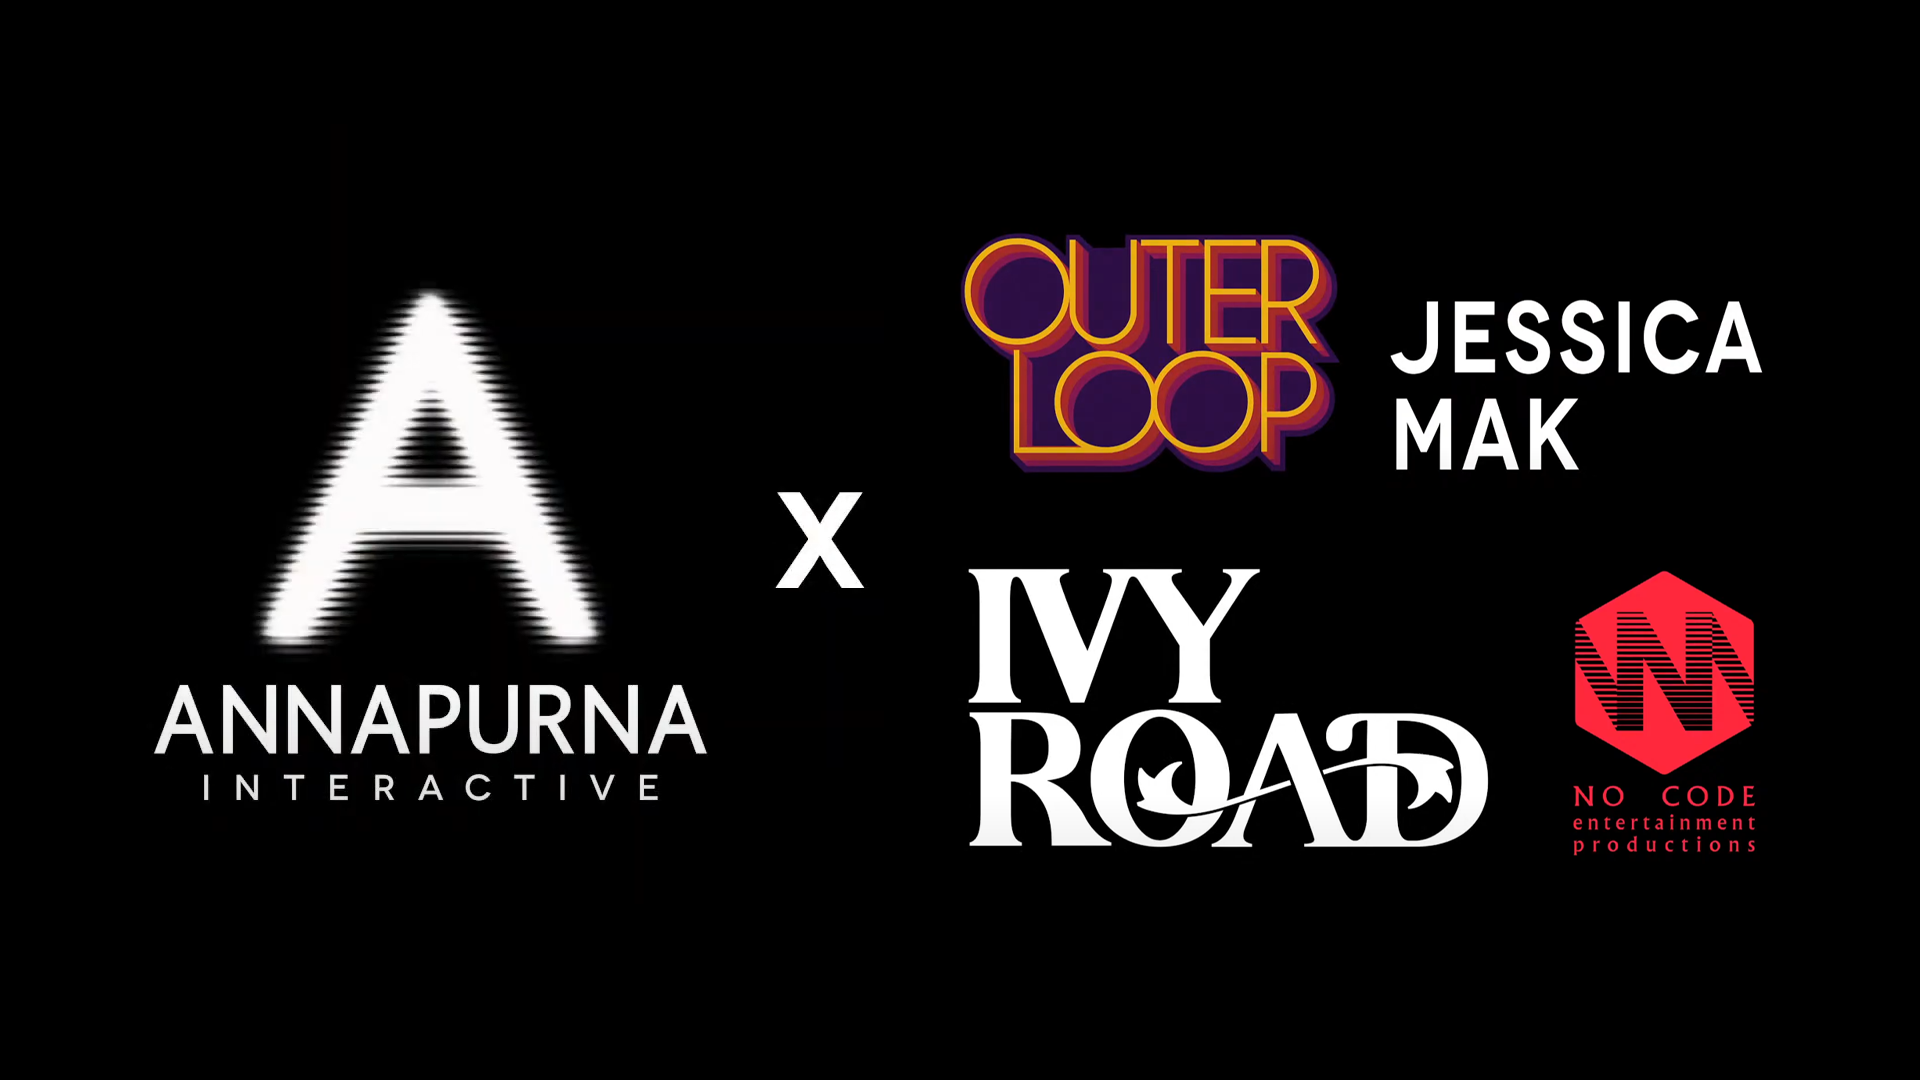 Annapurna Interactive to publish new games by Outerloop Games, Jessica Mak, Ivy Road, and No Code – Gematsu